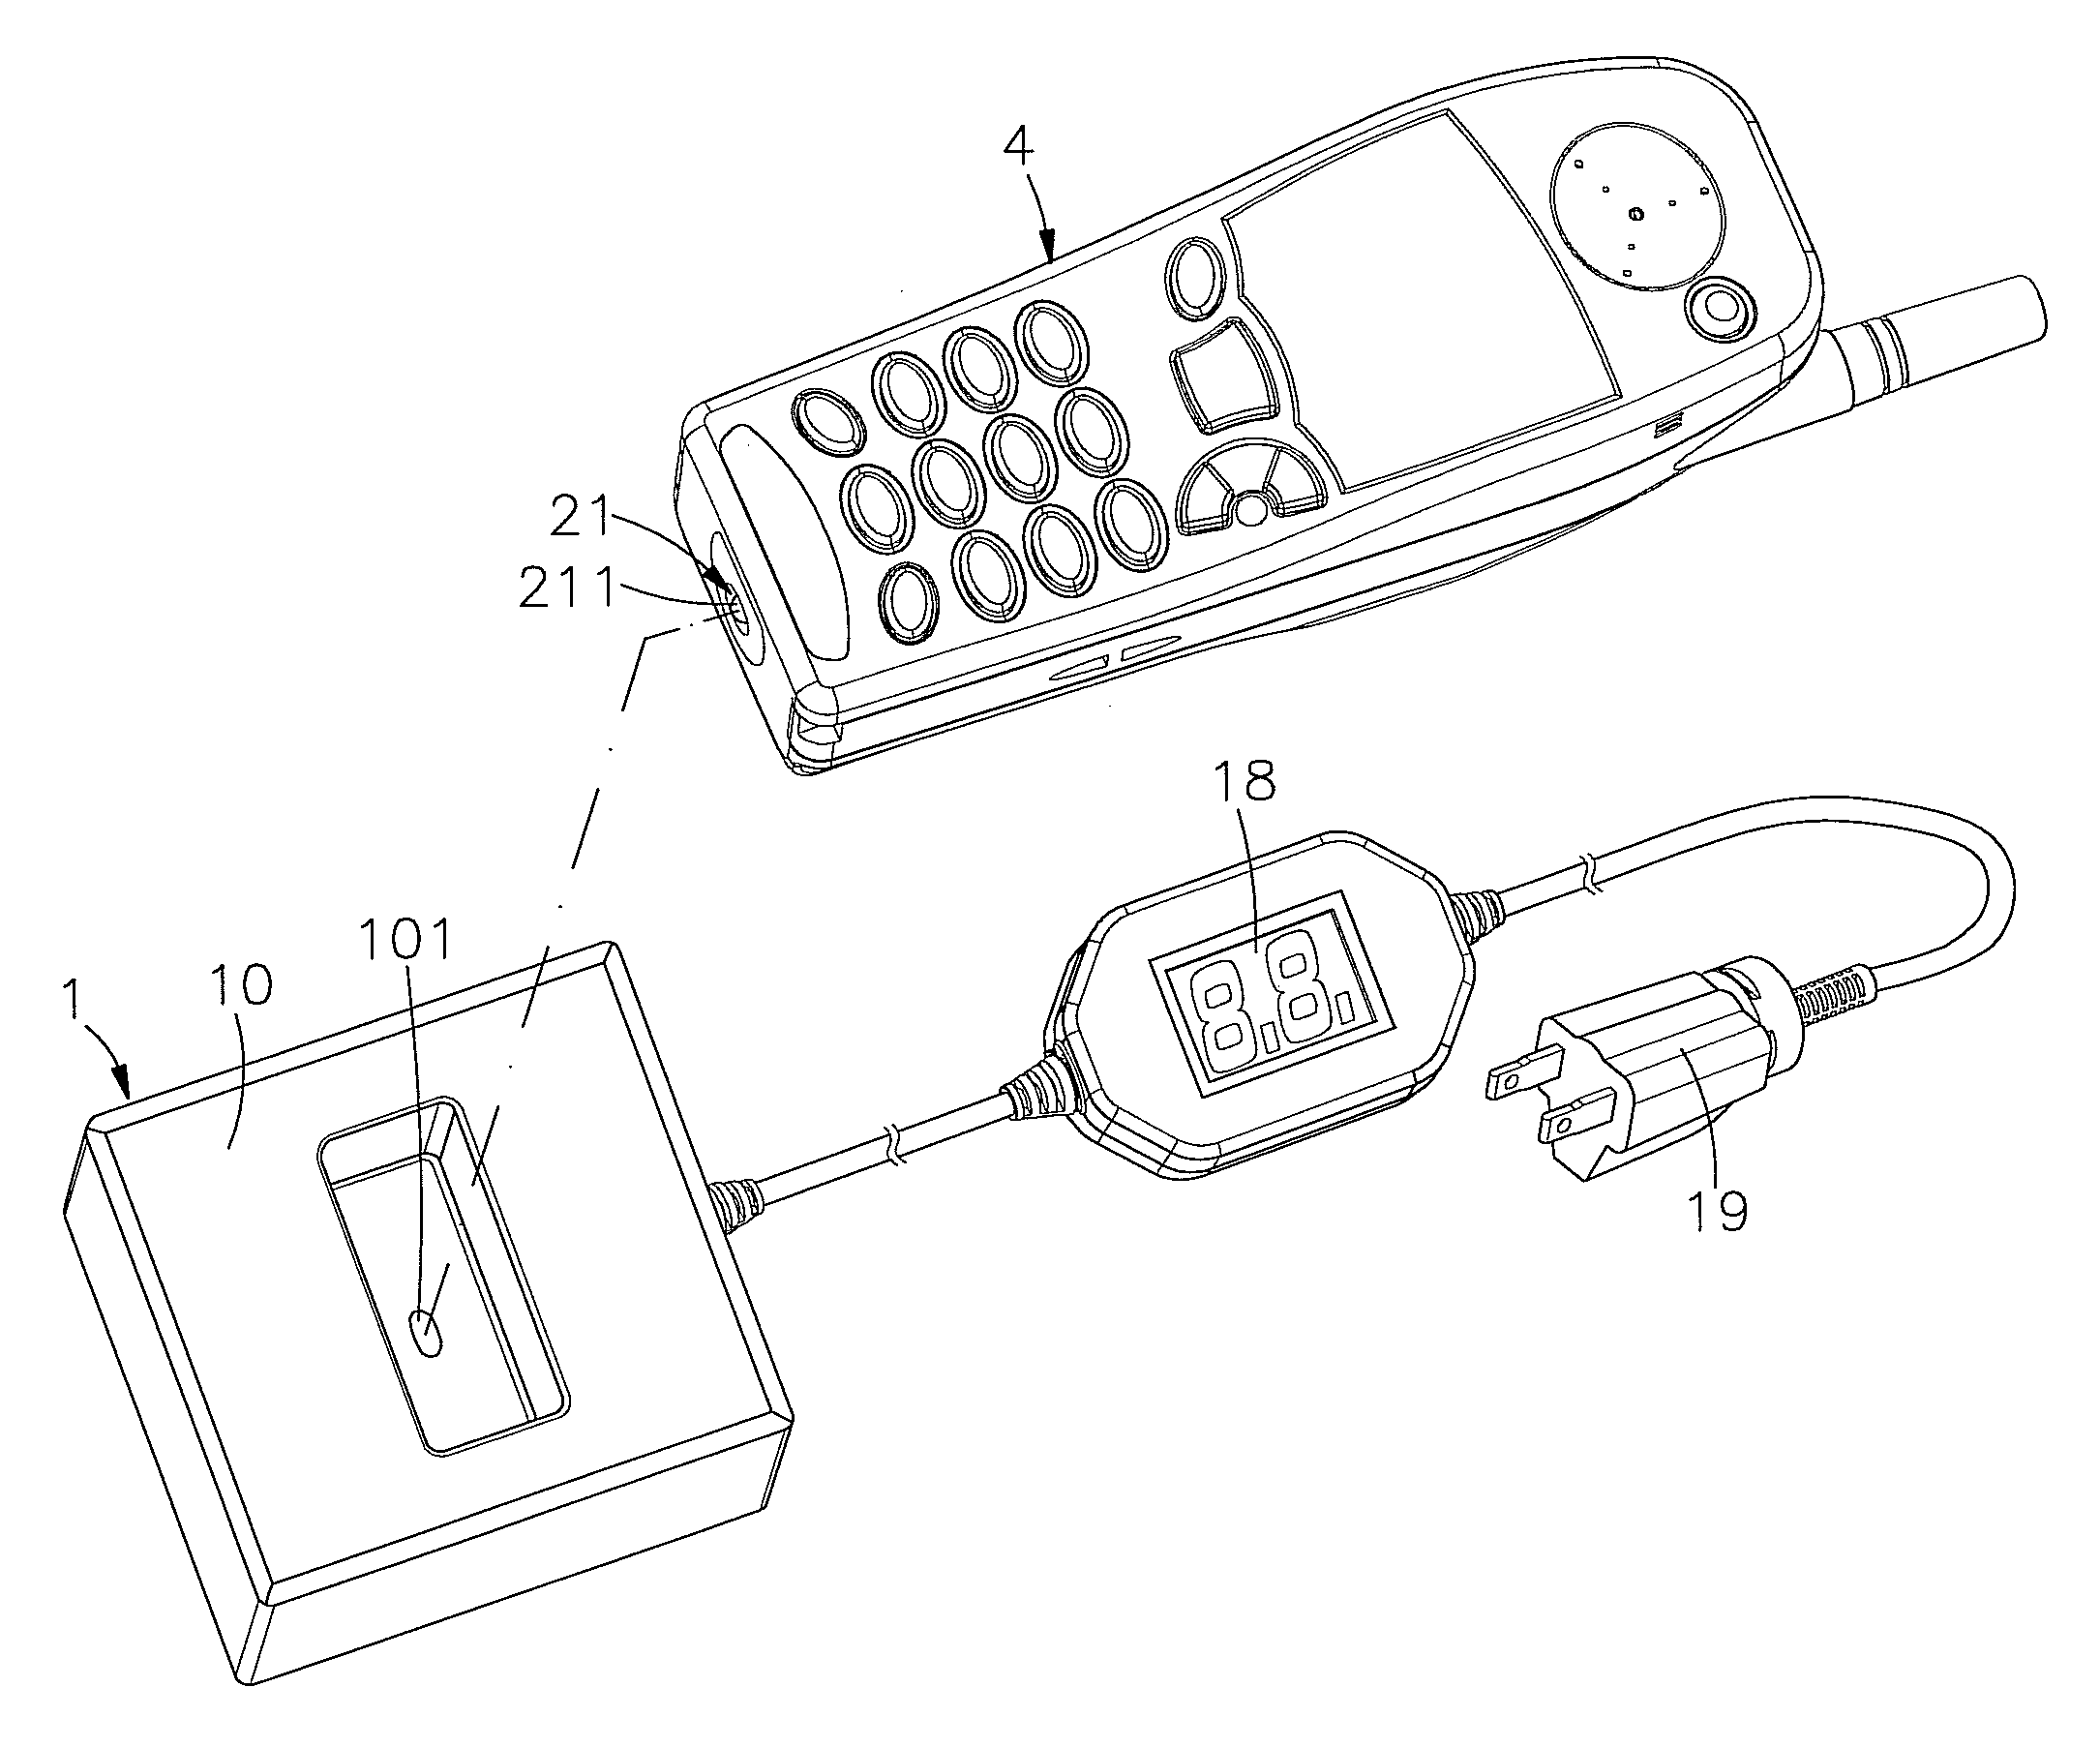 Method for identification of a light inductive charger